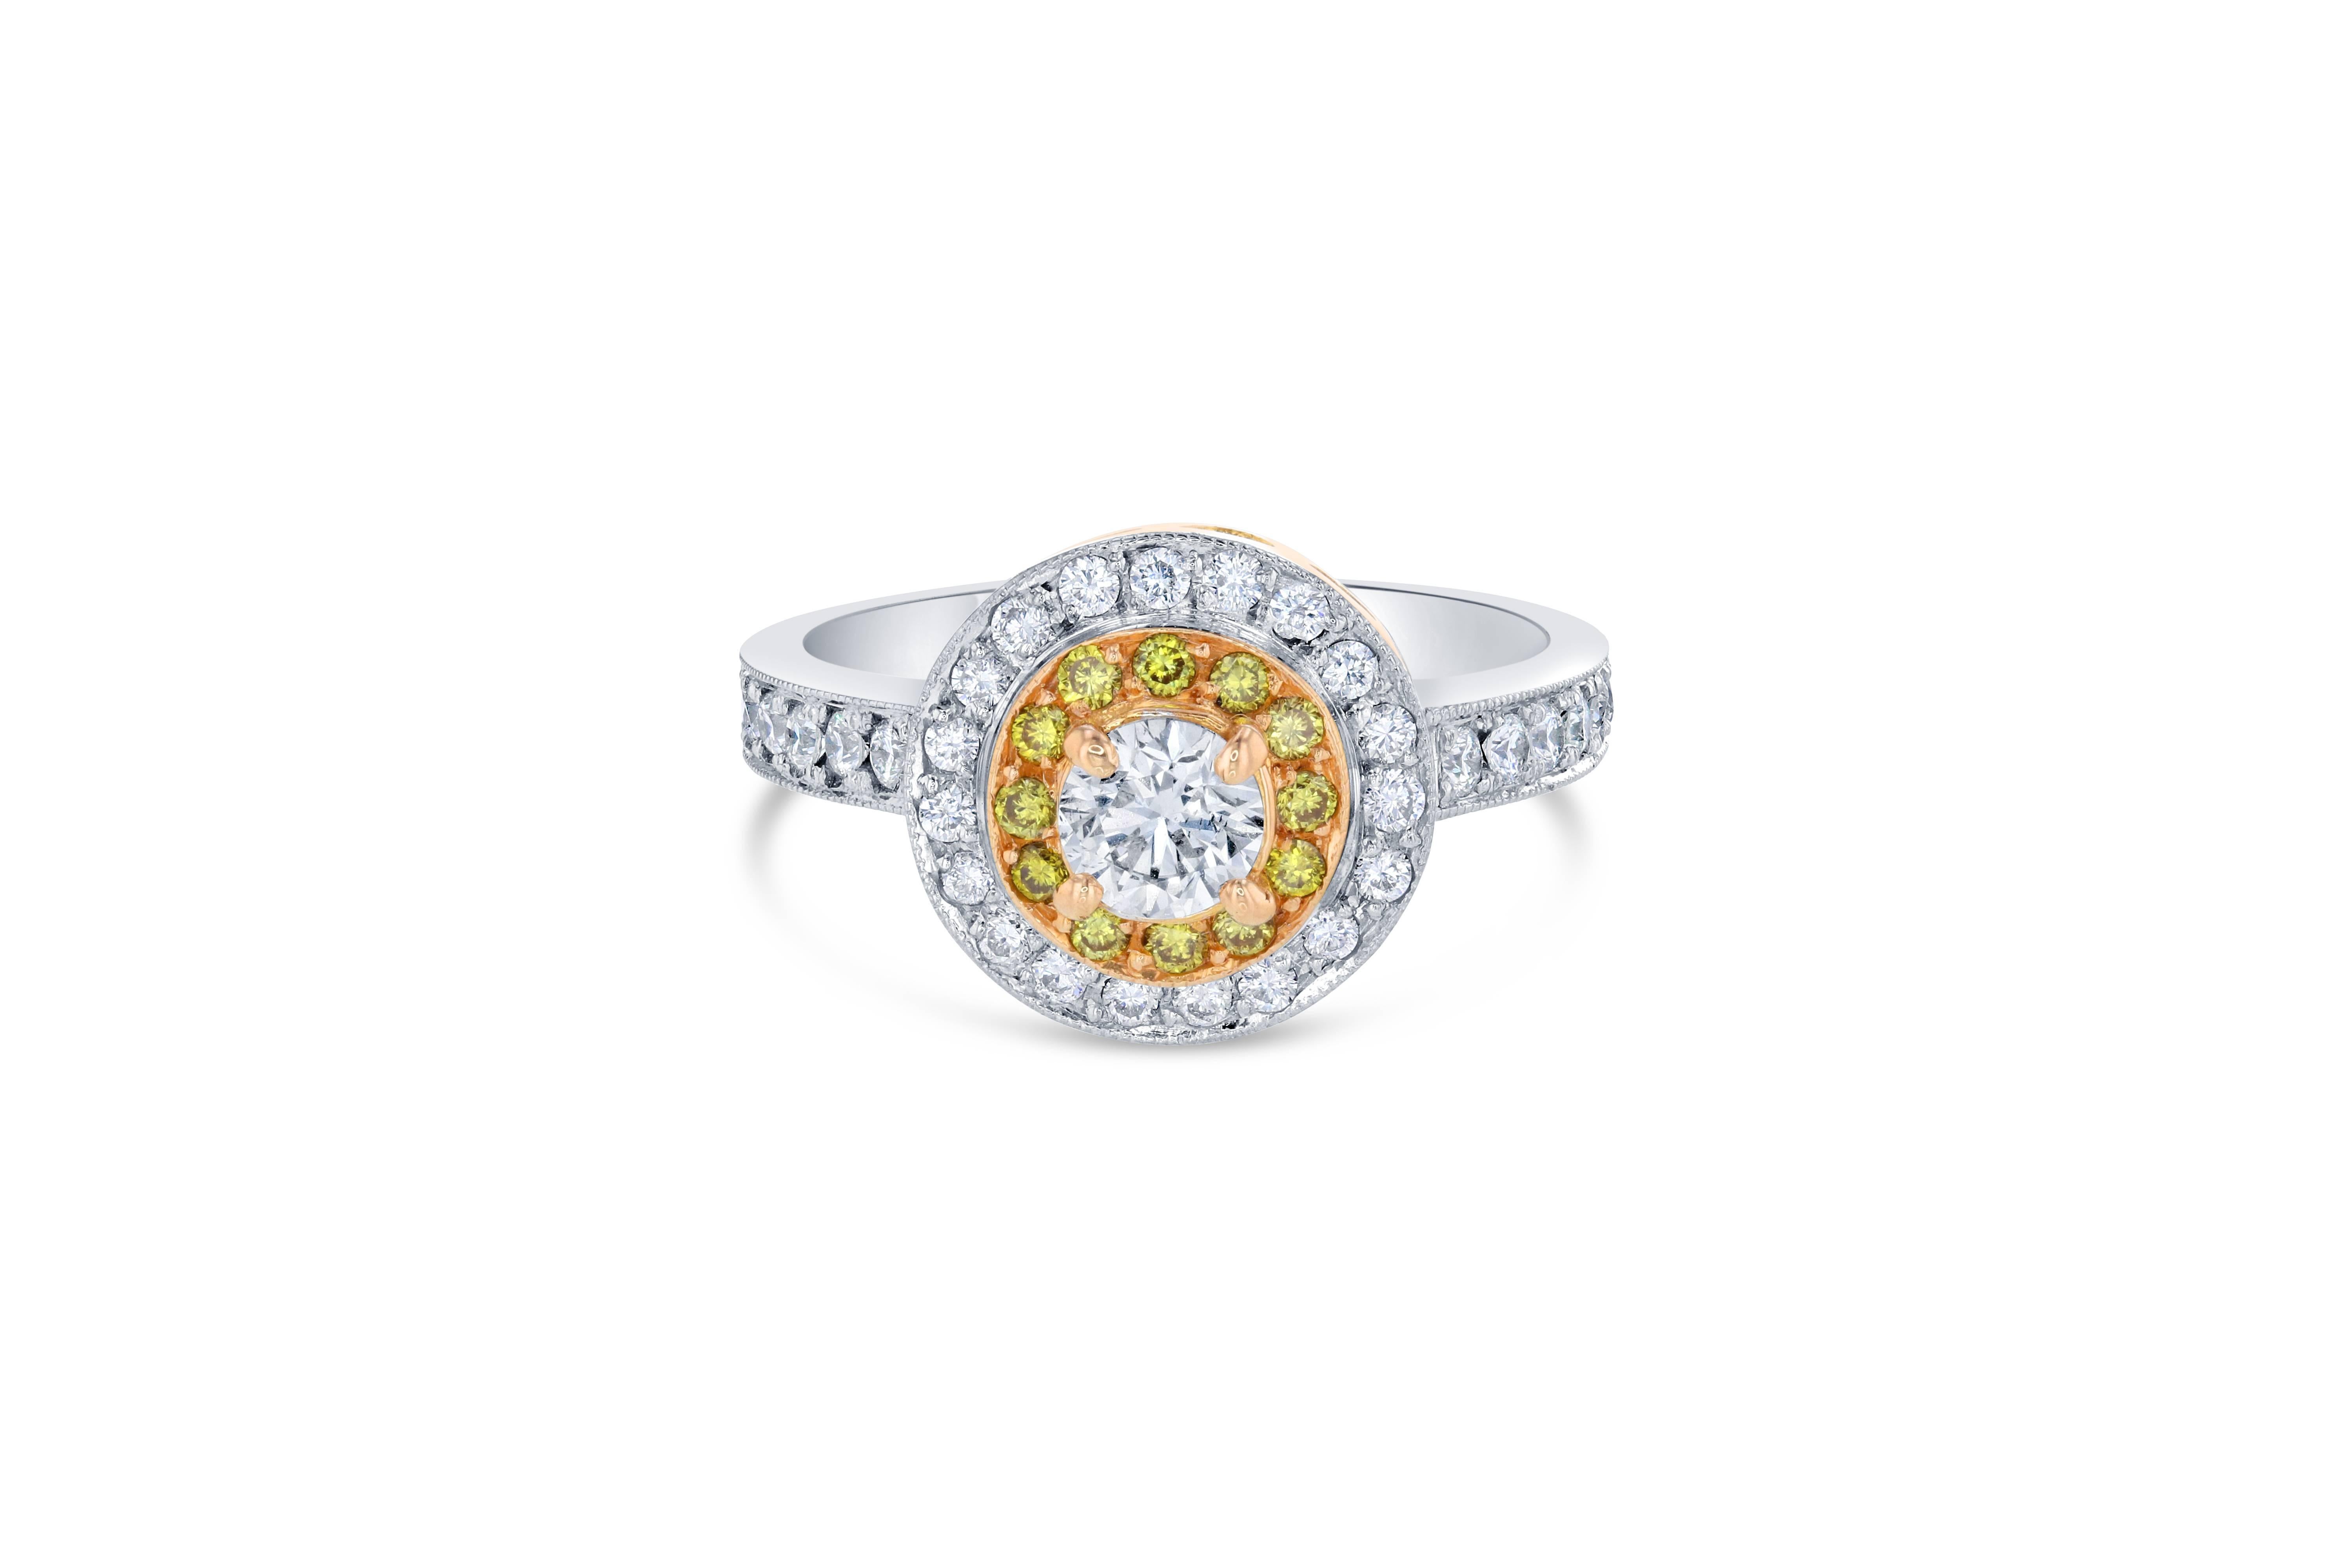 Stunning Round Brilliant Cut Diamond Ring! 

The center Round Cut Diamond is 0.40 Carats with a clarity and color of SI-F. It is surrounded first by a halo of natural 12 Yellow Round Cut Diamonds that weigh 0.15 Carats and a second halo of 33 Round